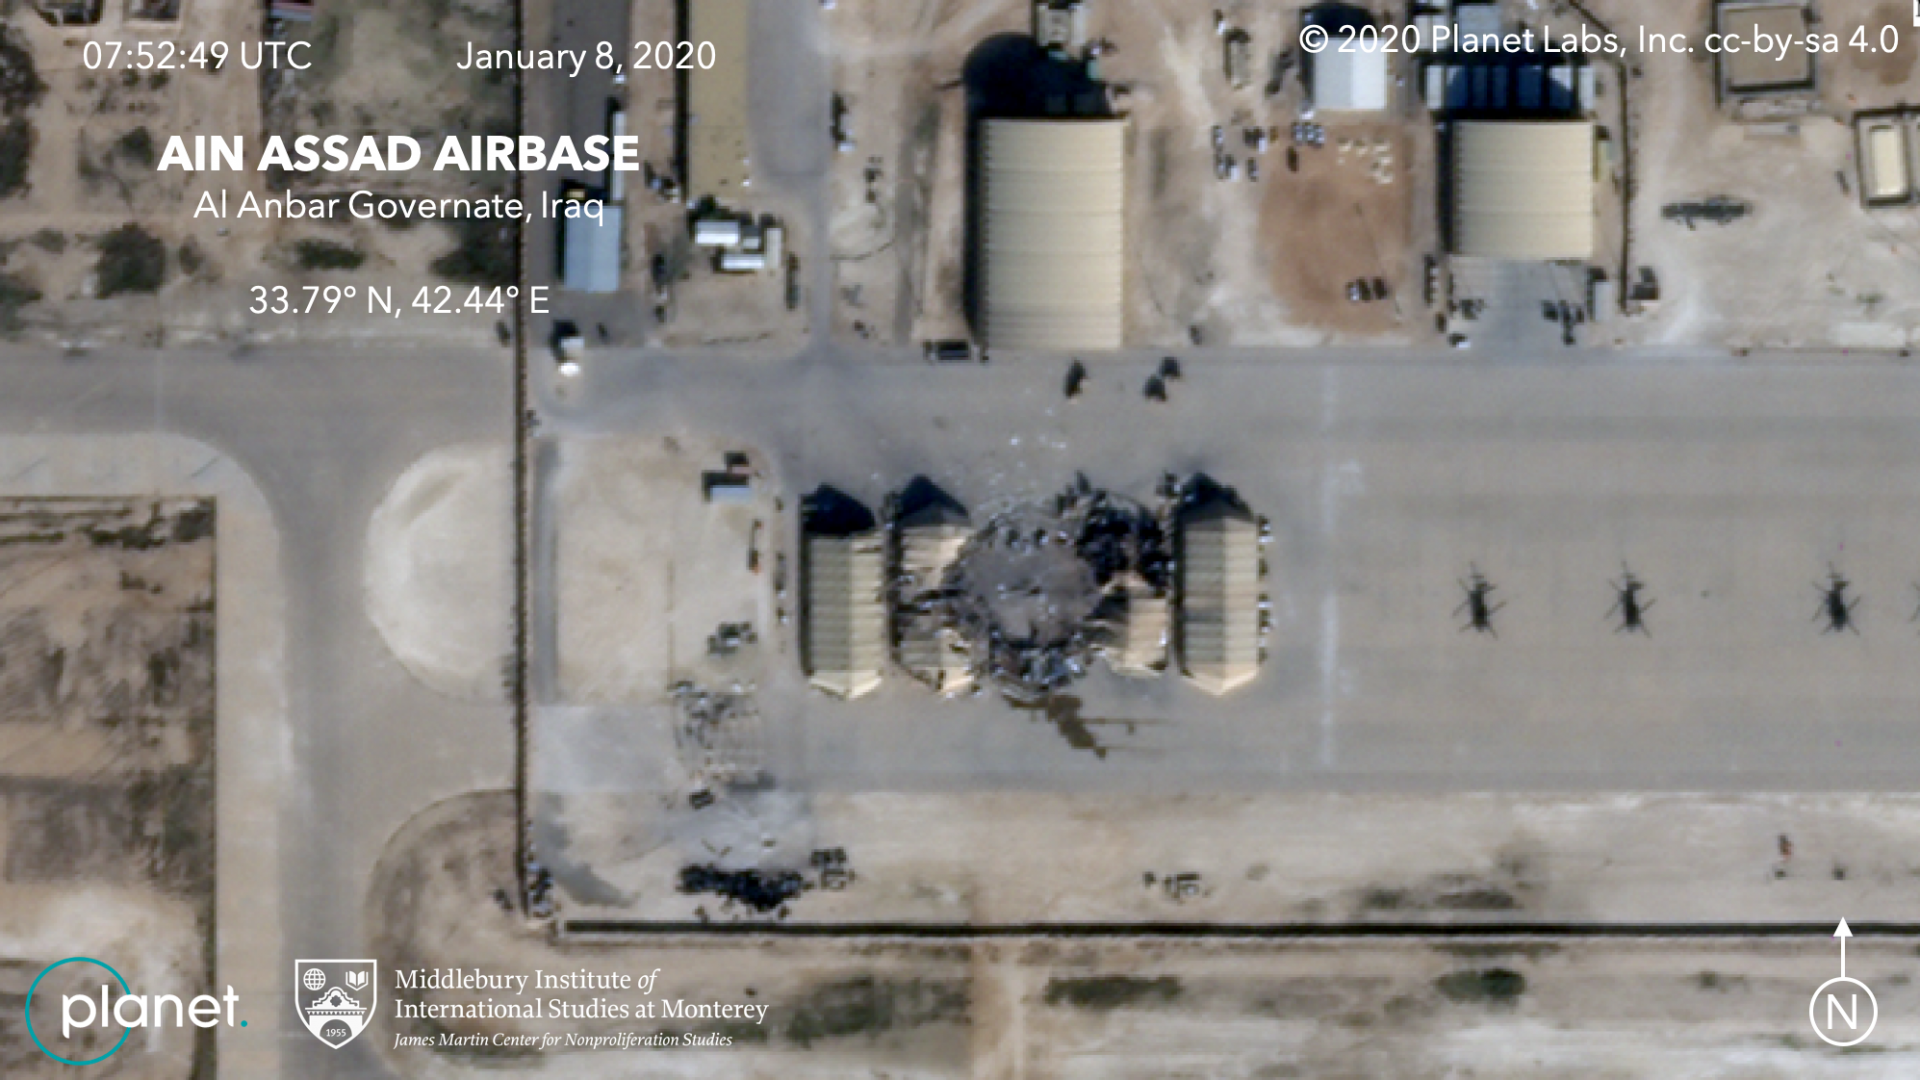 A satellite photo from the commercial company Planet shows damage to at least five structures at the Ain al-Assad air base in Iraq.